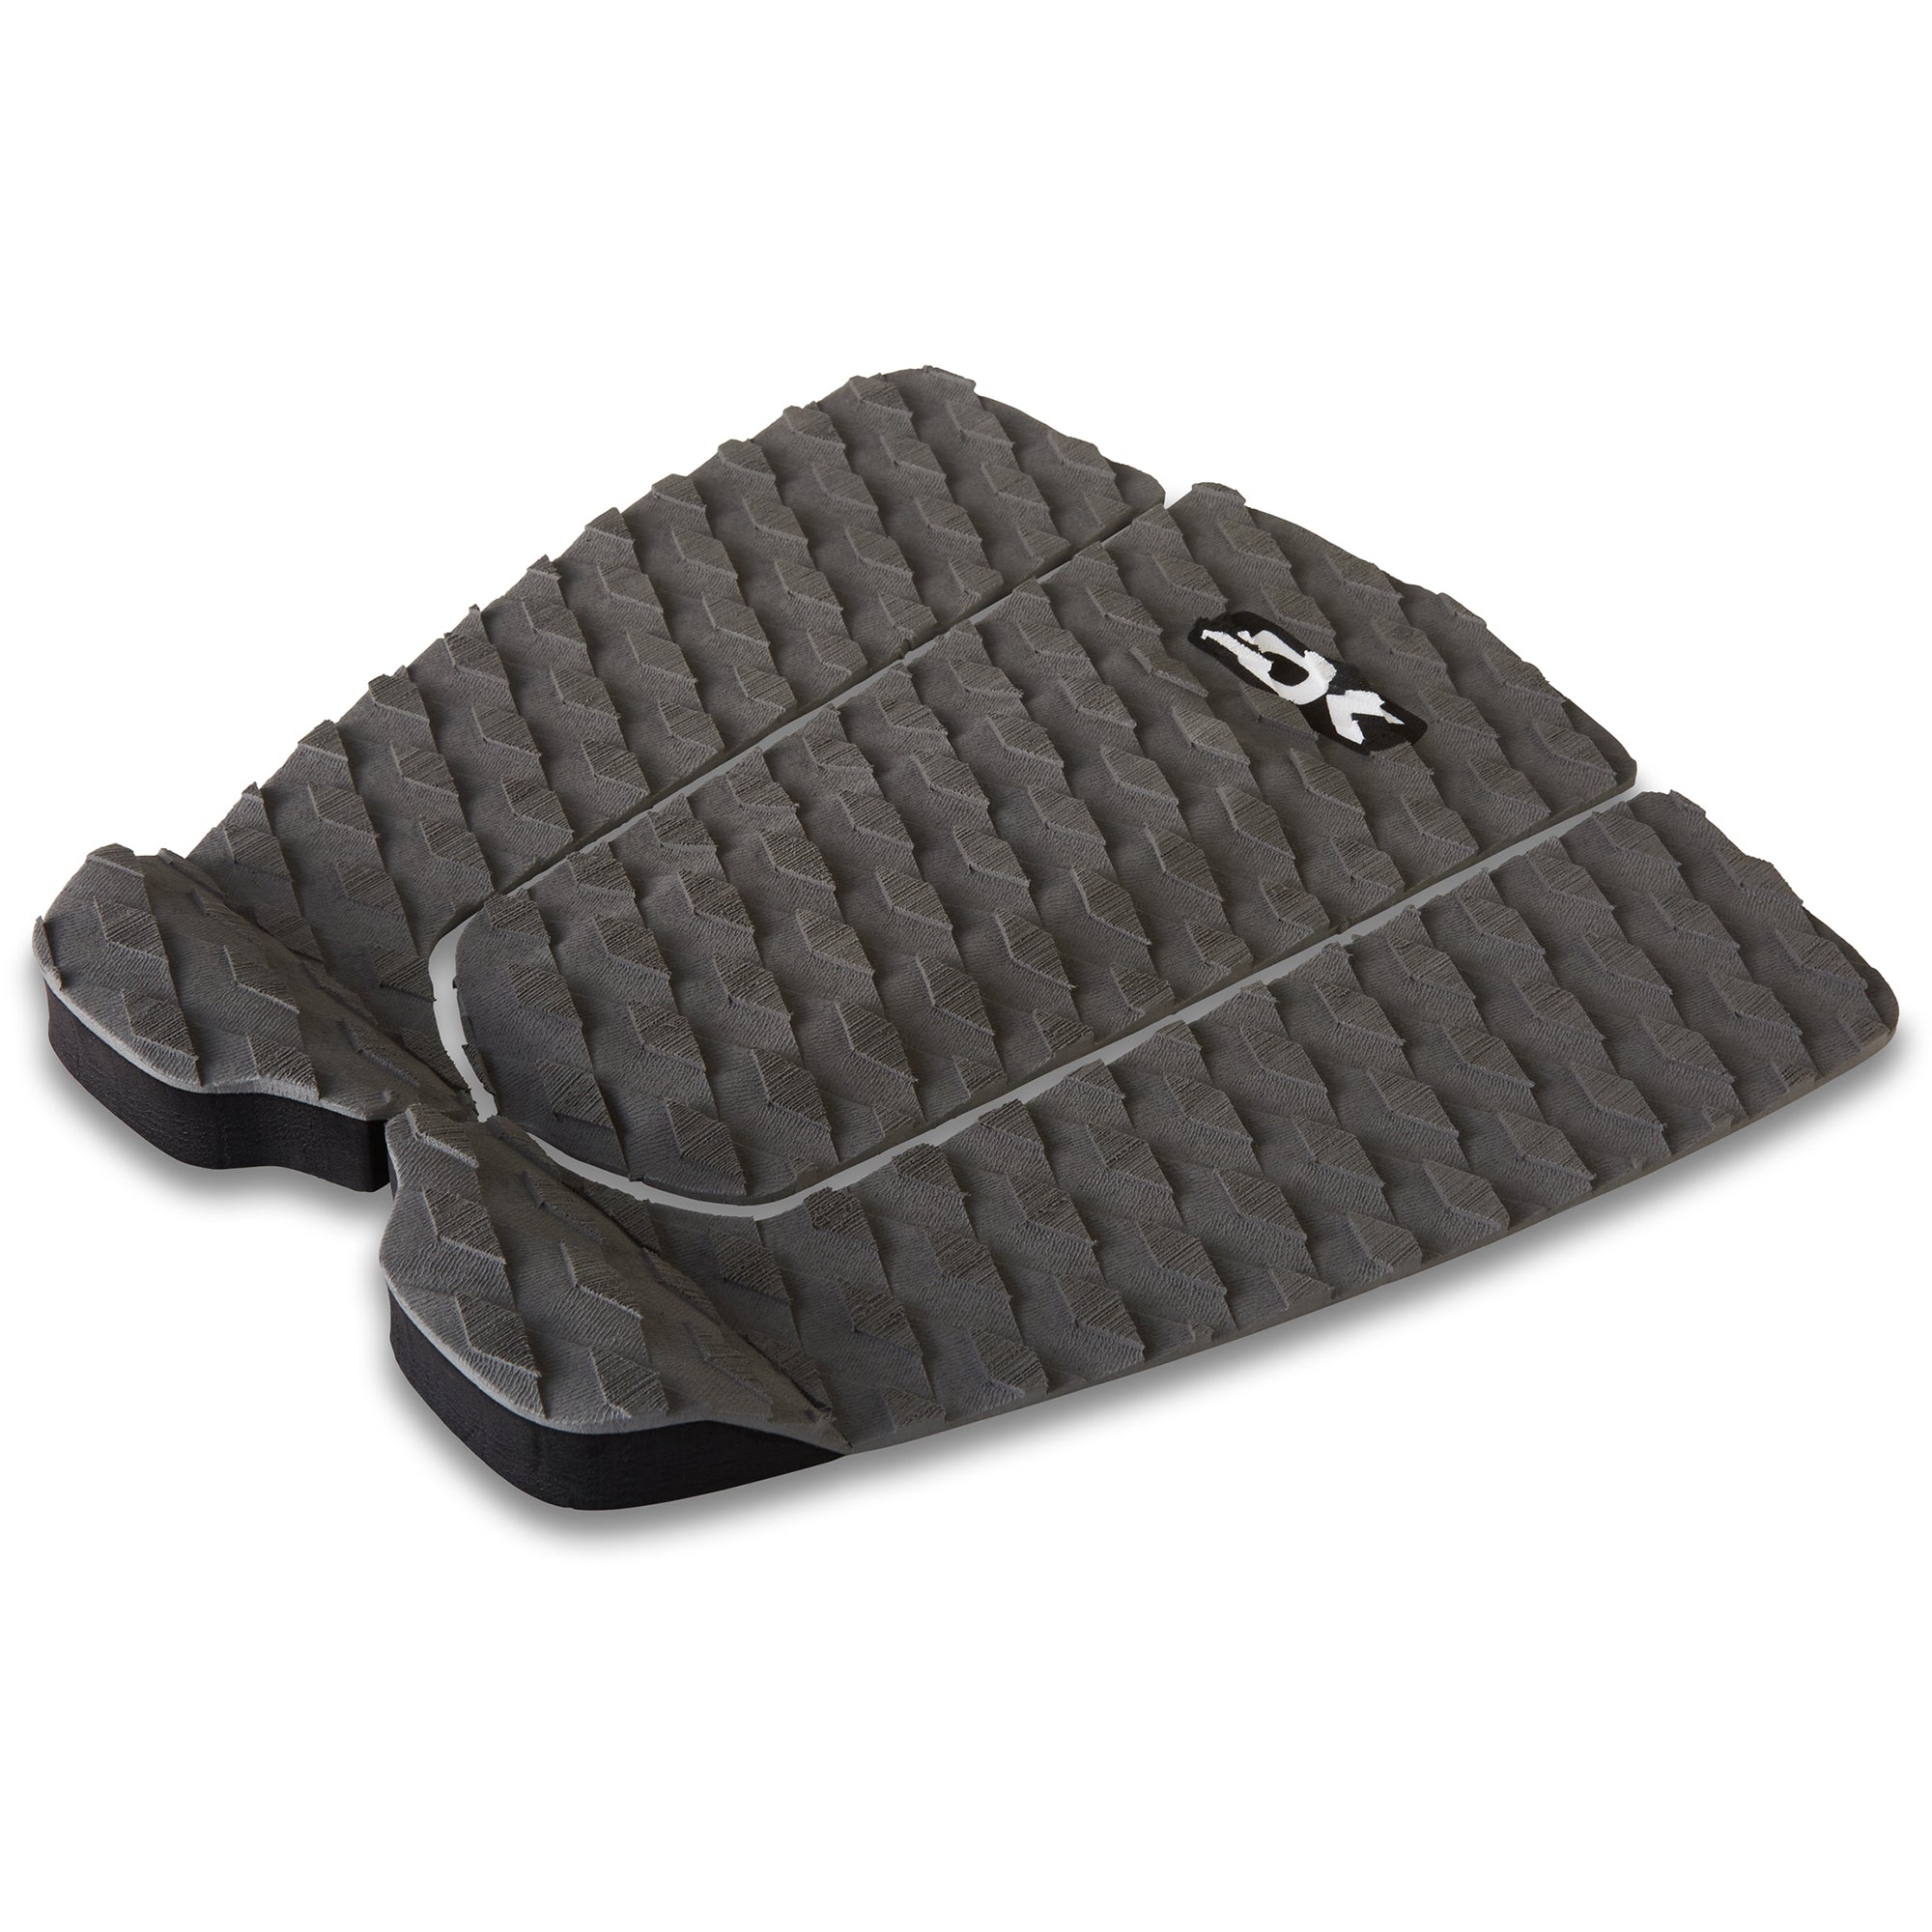 Dakine Andy Irons Pro Traction Pad 071-Shadow